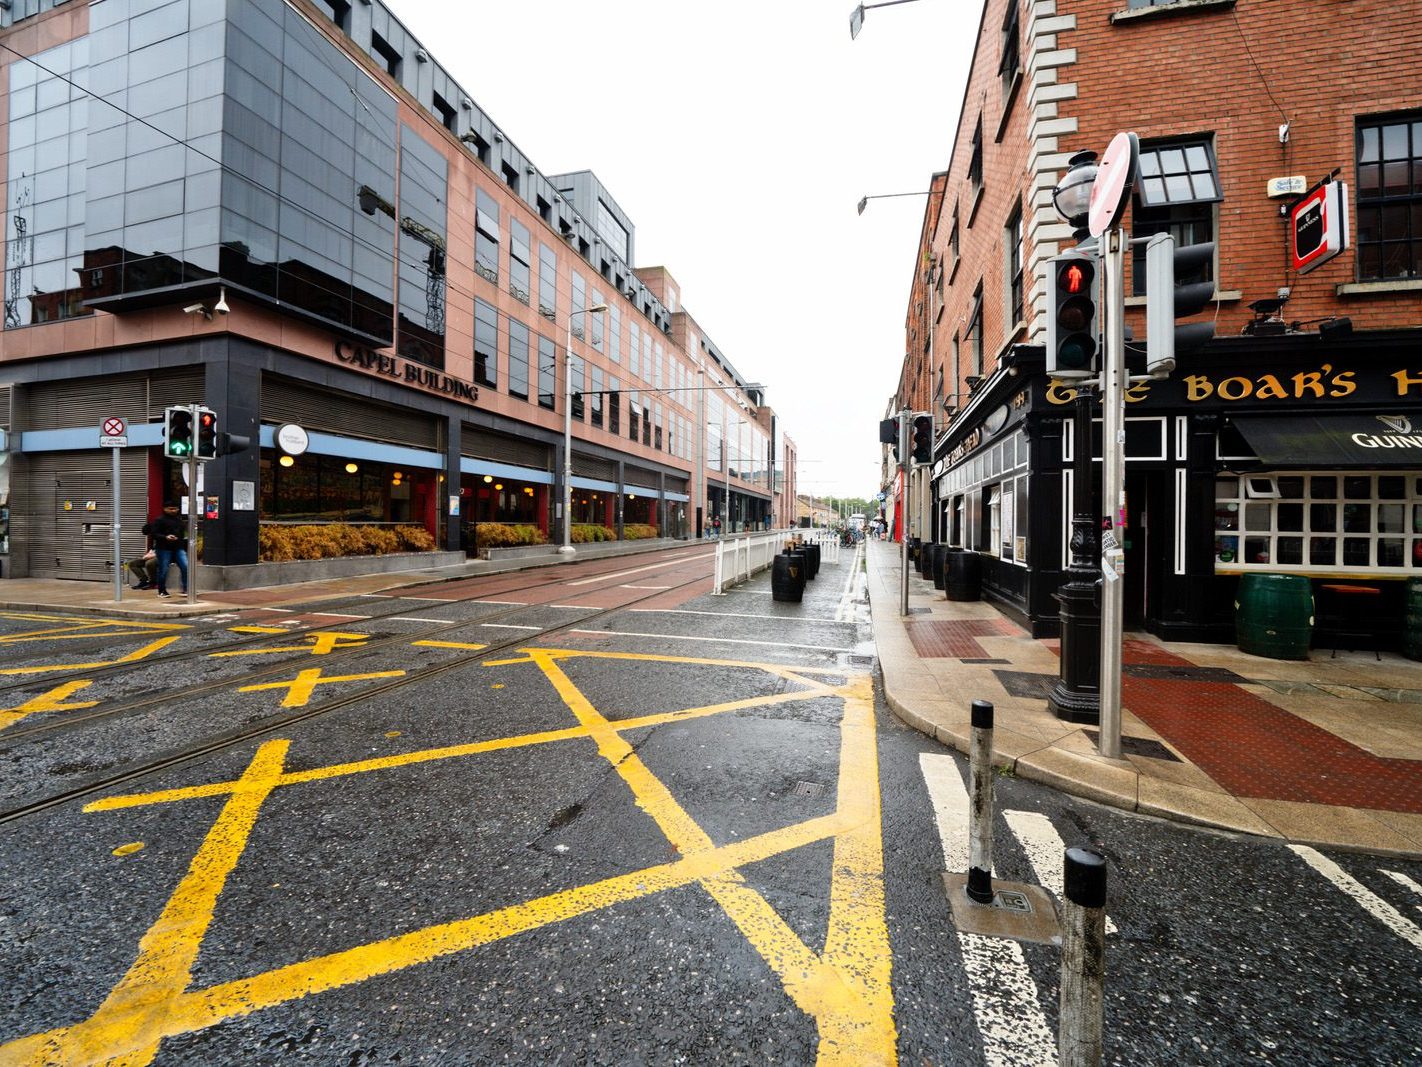 CAPEL STREET ON A DULL WET DAY [INTERIM CAPEL STREET IMPROVEMENT WORKS ARE NOW ONGOING] 021